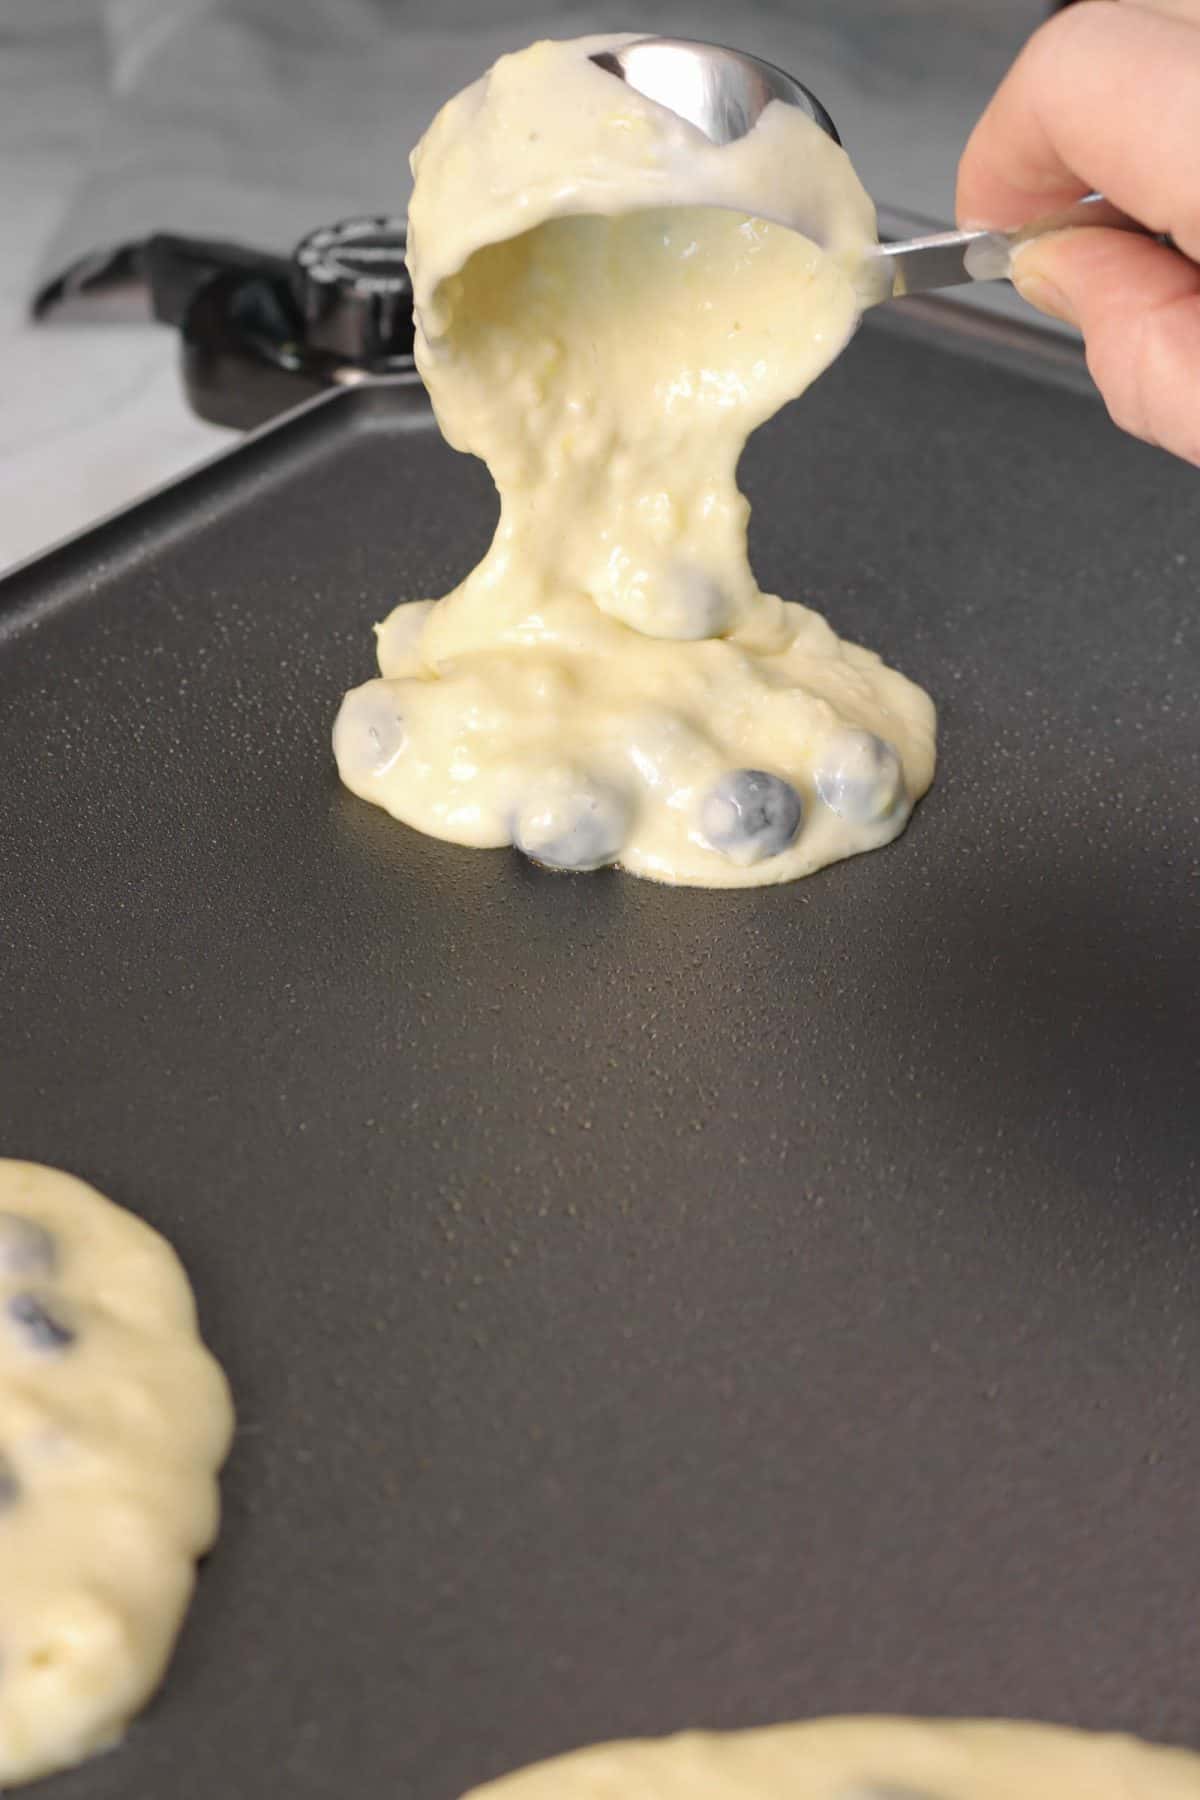 blueberry pancake batter being poured onto a griddle